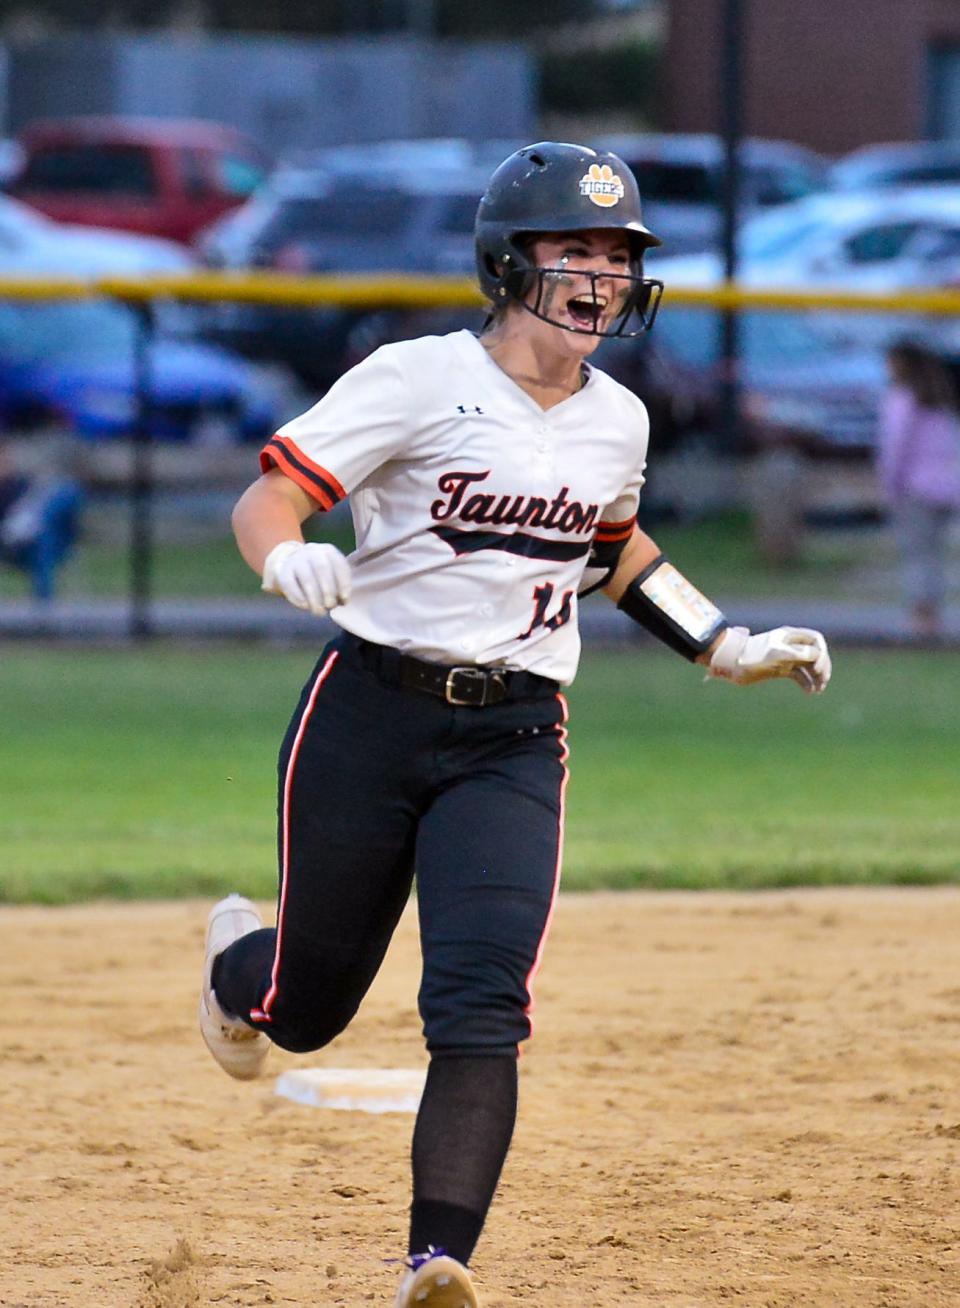 Taunton’s Kaysie Demoura smiles after hitting a home run during the Division 1 Final Four game against Methuen held at Worcester State.